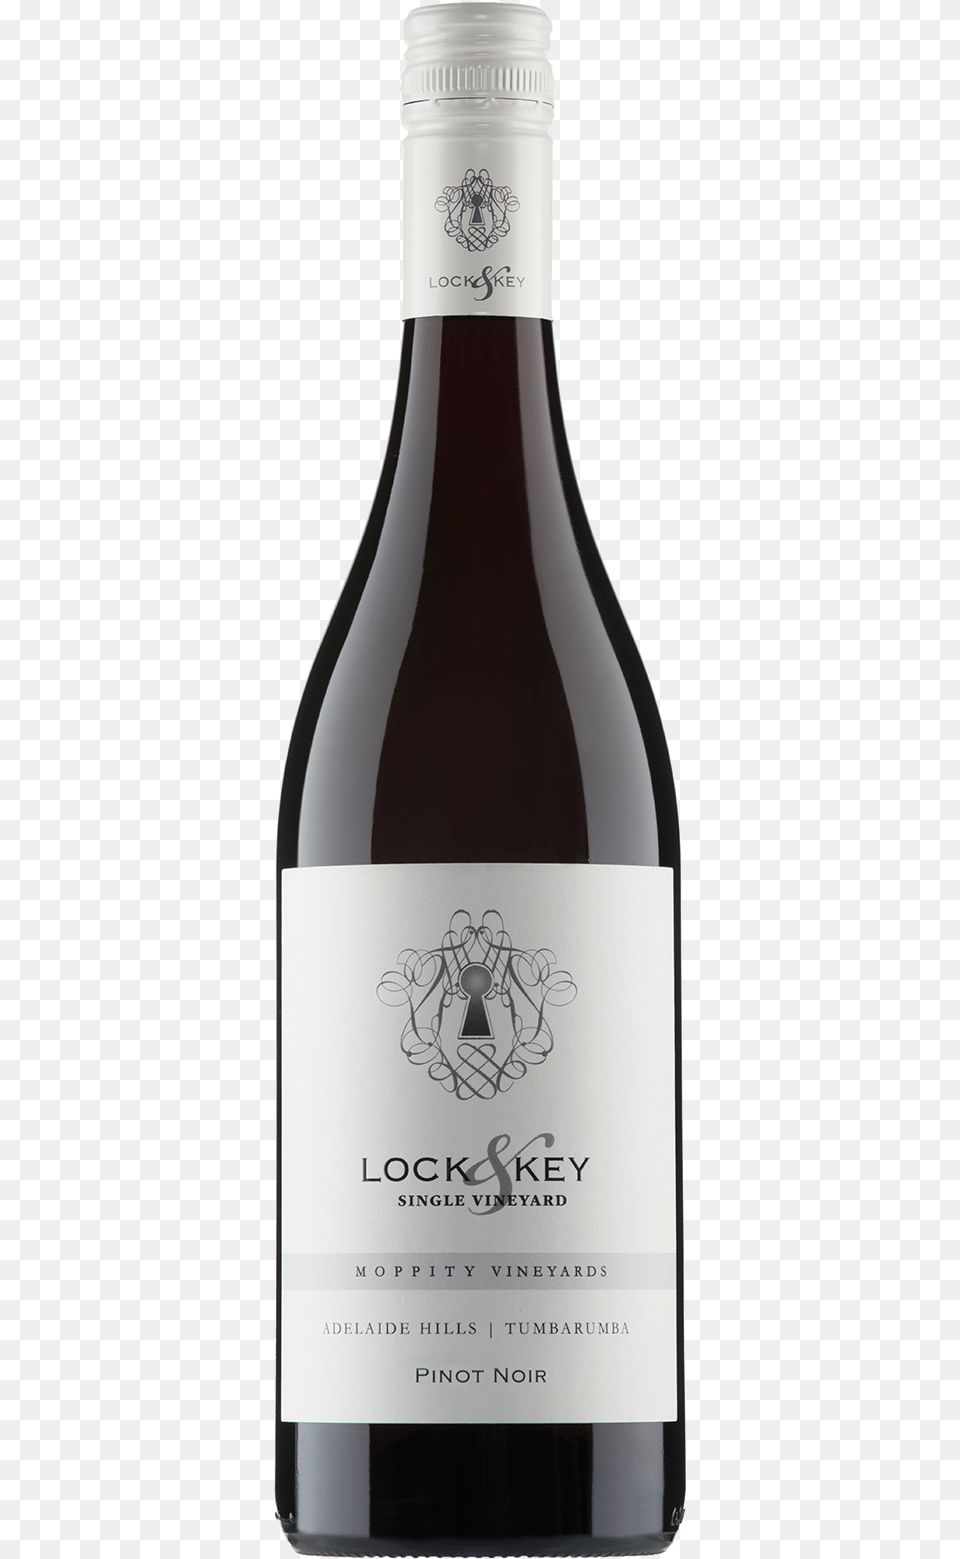 The 2017 Lock Amp Key Pinot Noir Is A Fantastic Value Glass Bottle, Alcohol, Beverage, Liquor, Red Wine Png Image